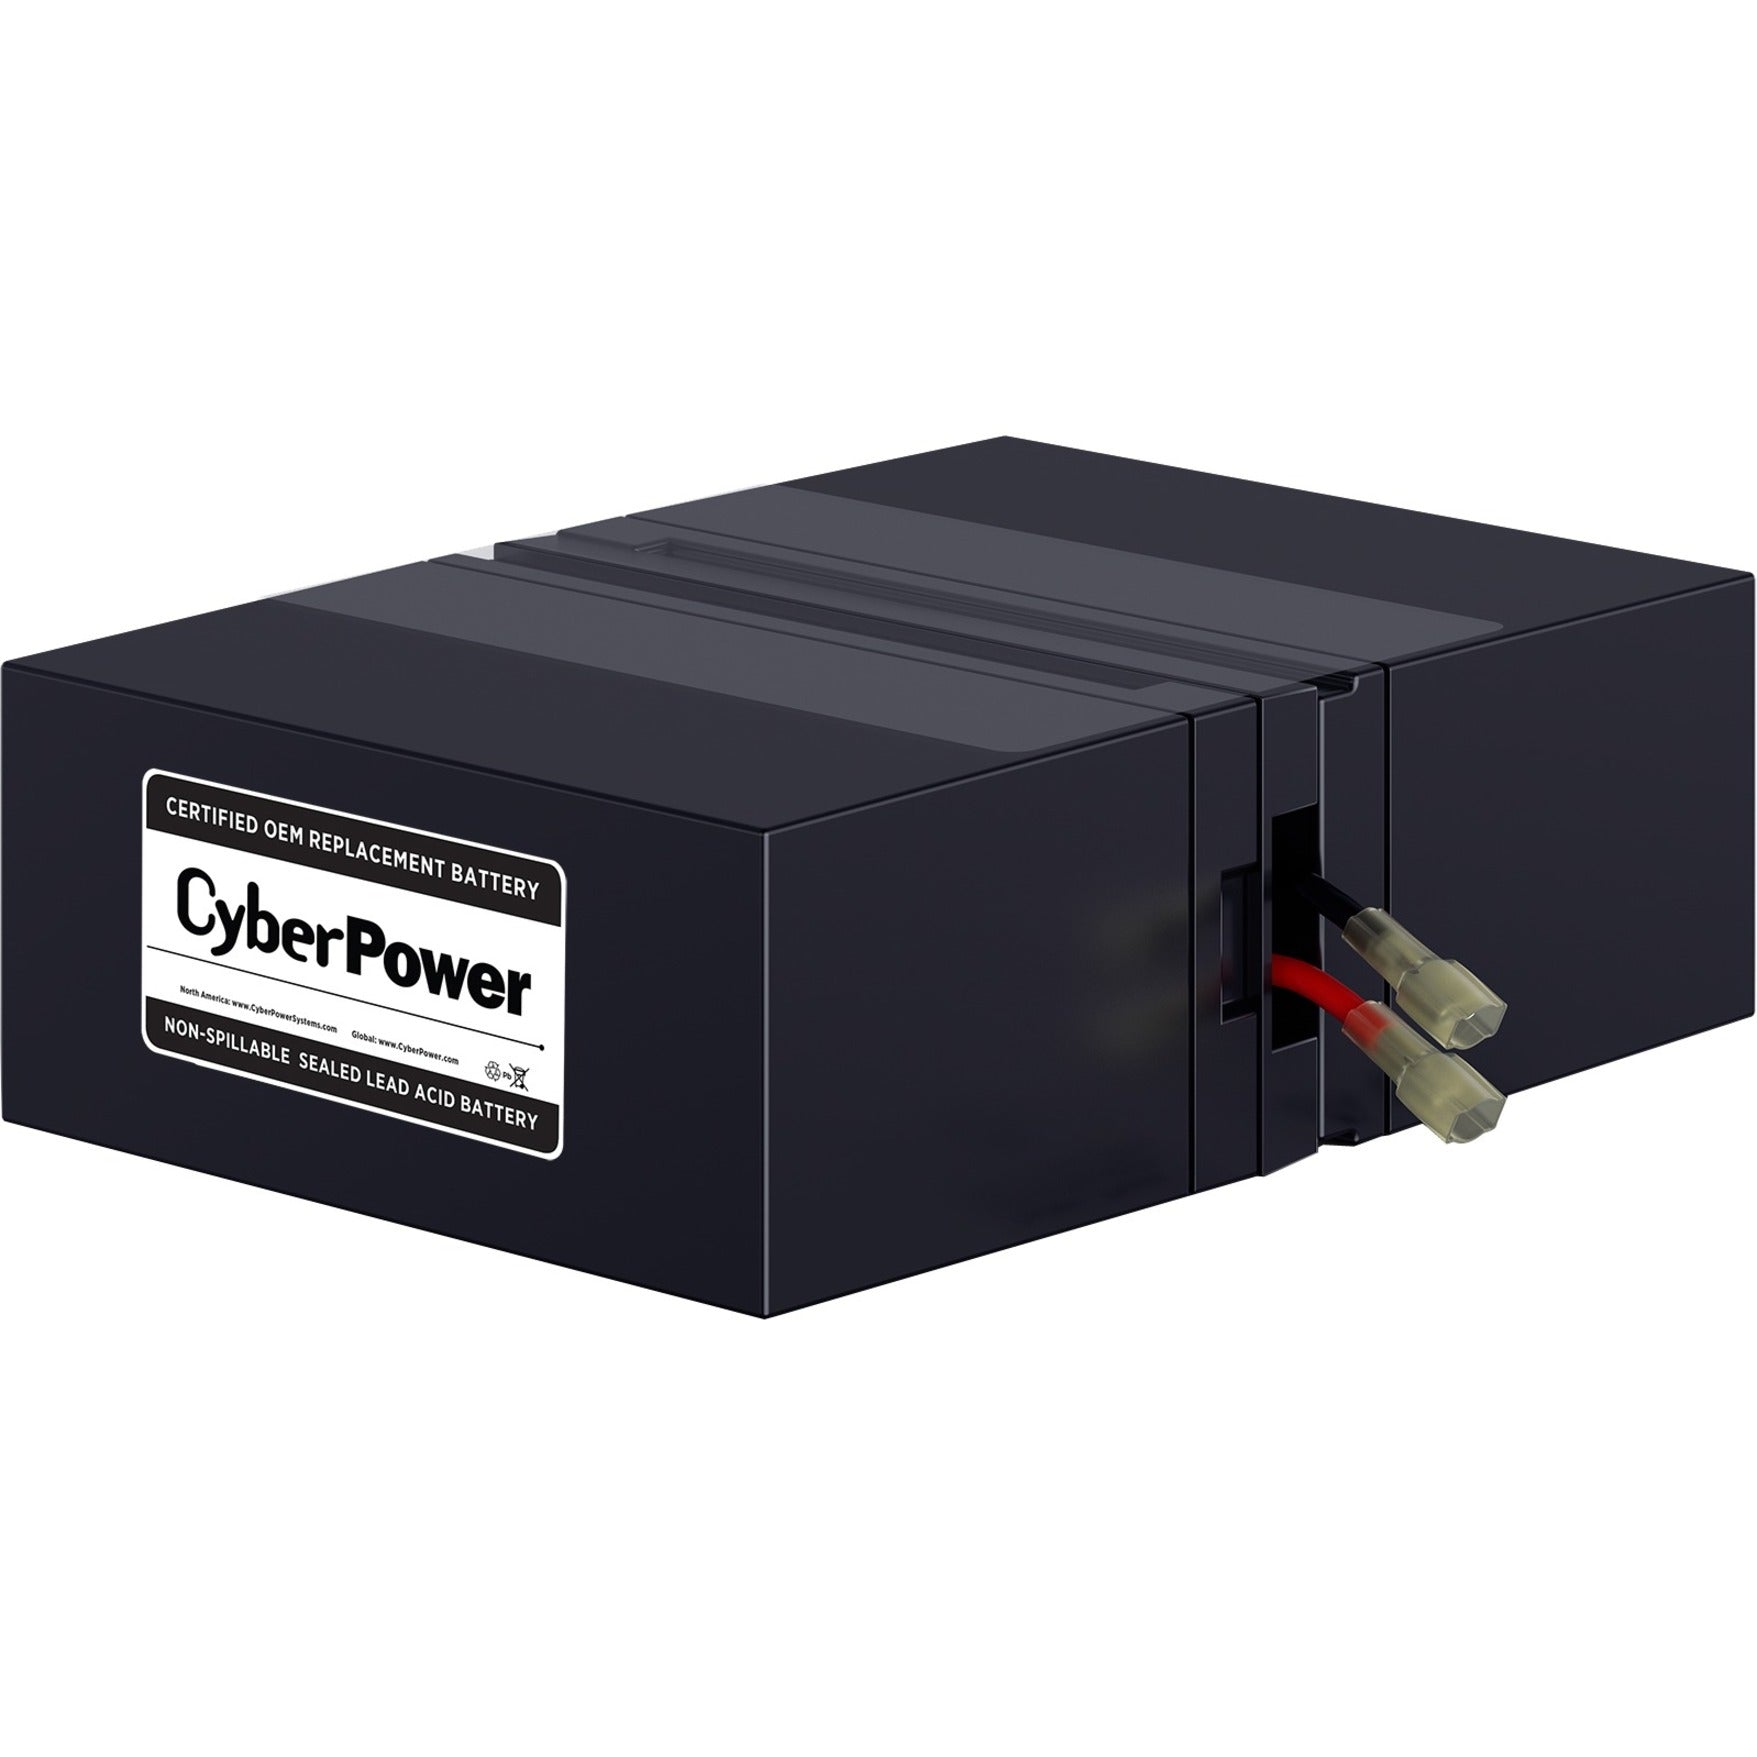 CyberPower RB1280X2A UPS Replacement Battery Cartridge, 18 Month Warranty, 12V DC, 8000mAh, Lead Acid, Maintenance-free